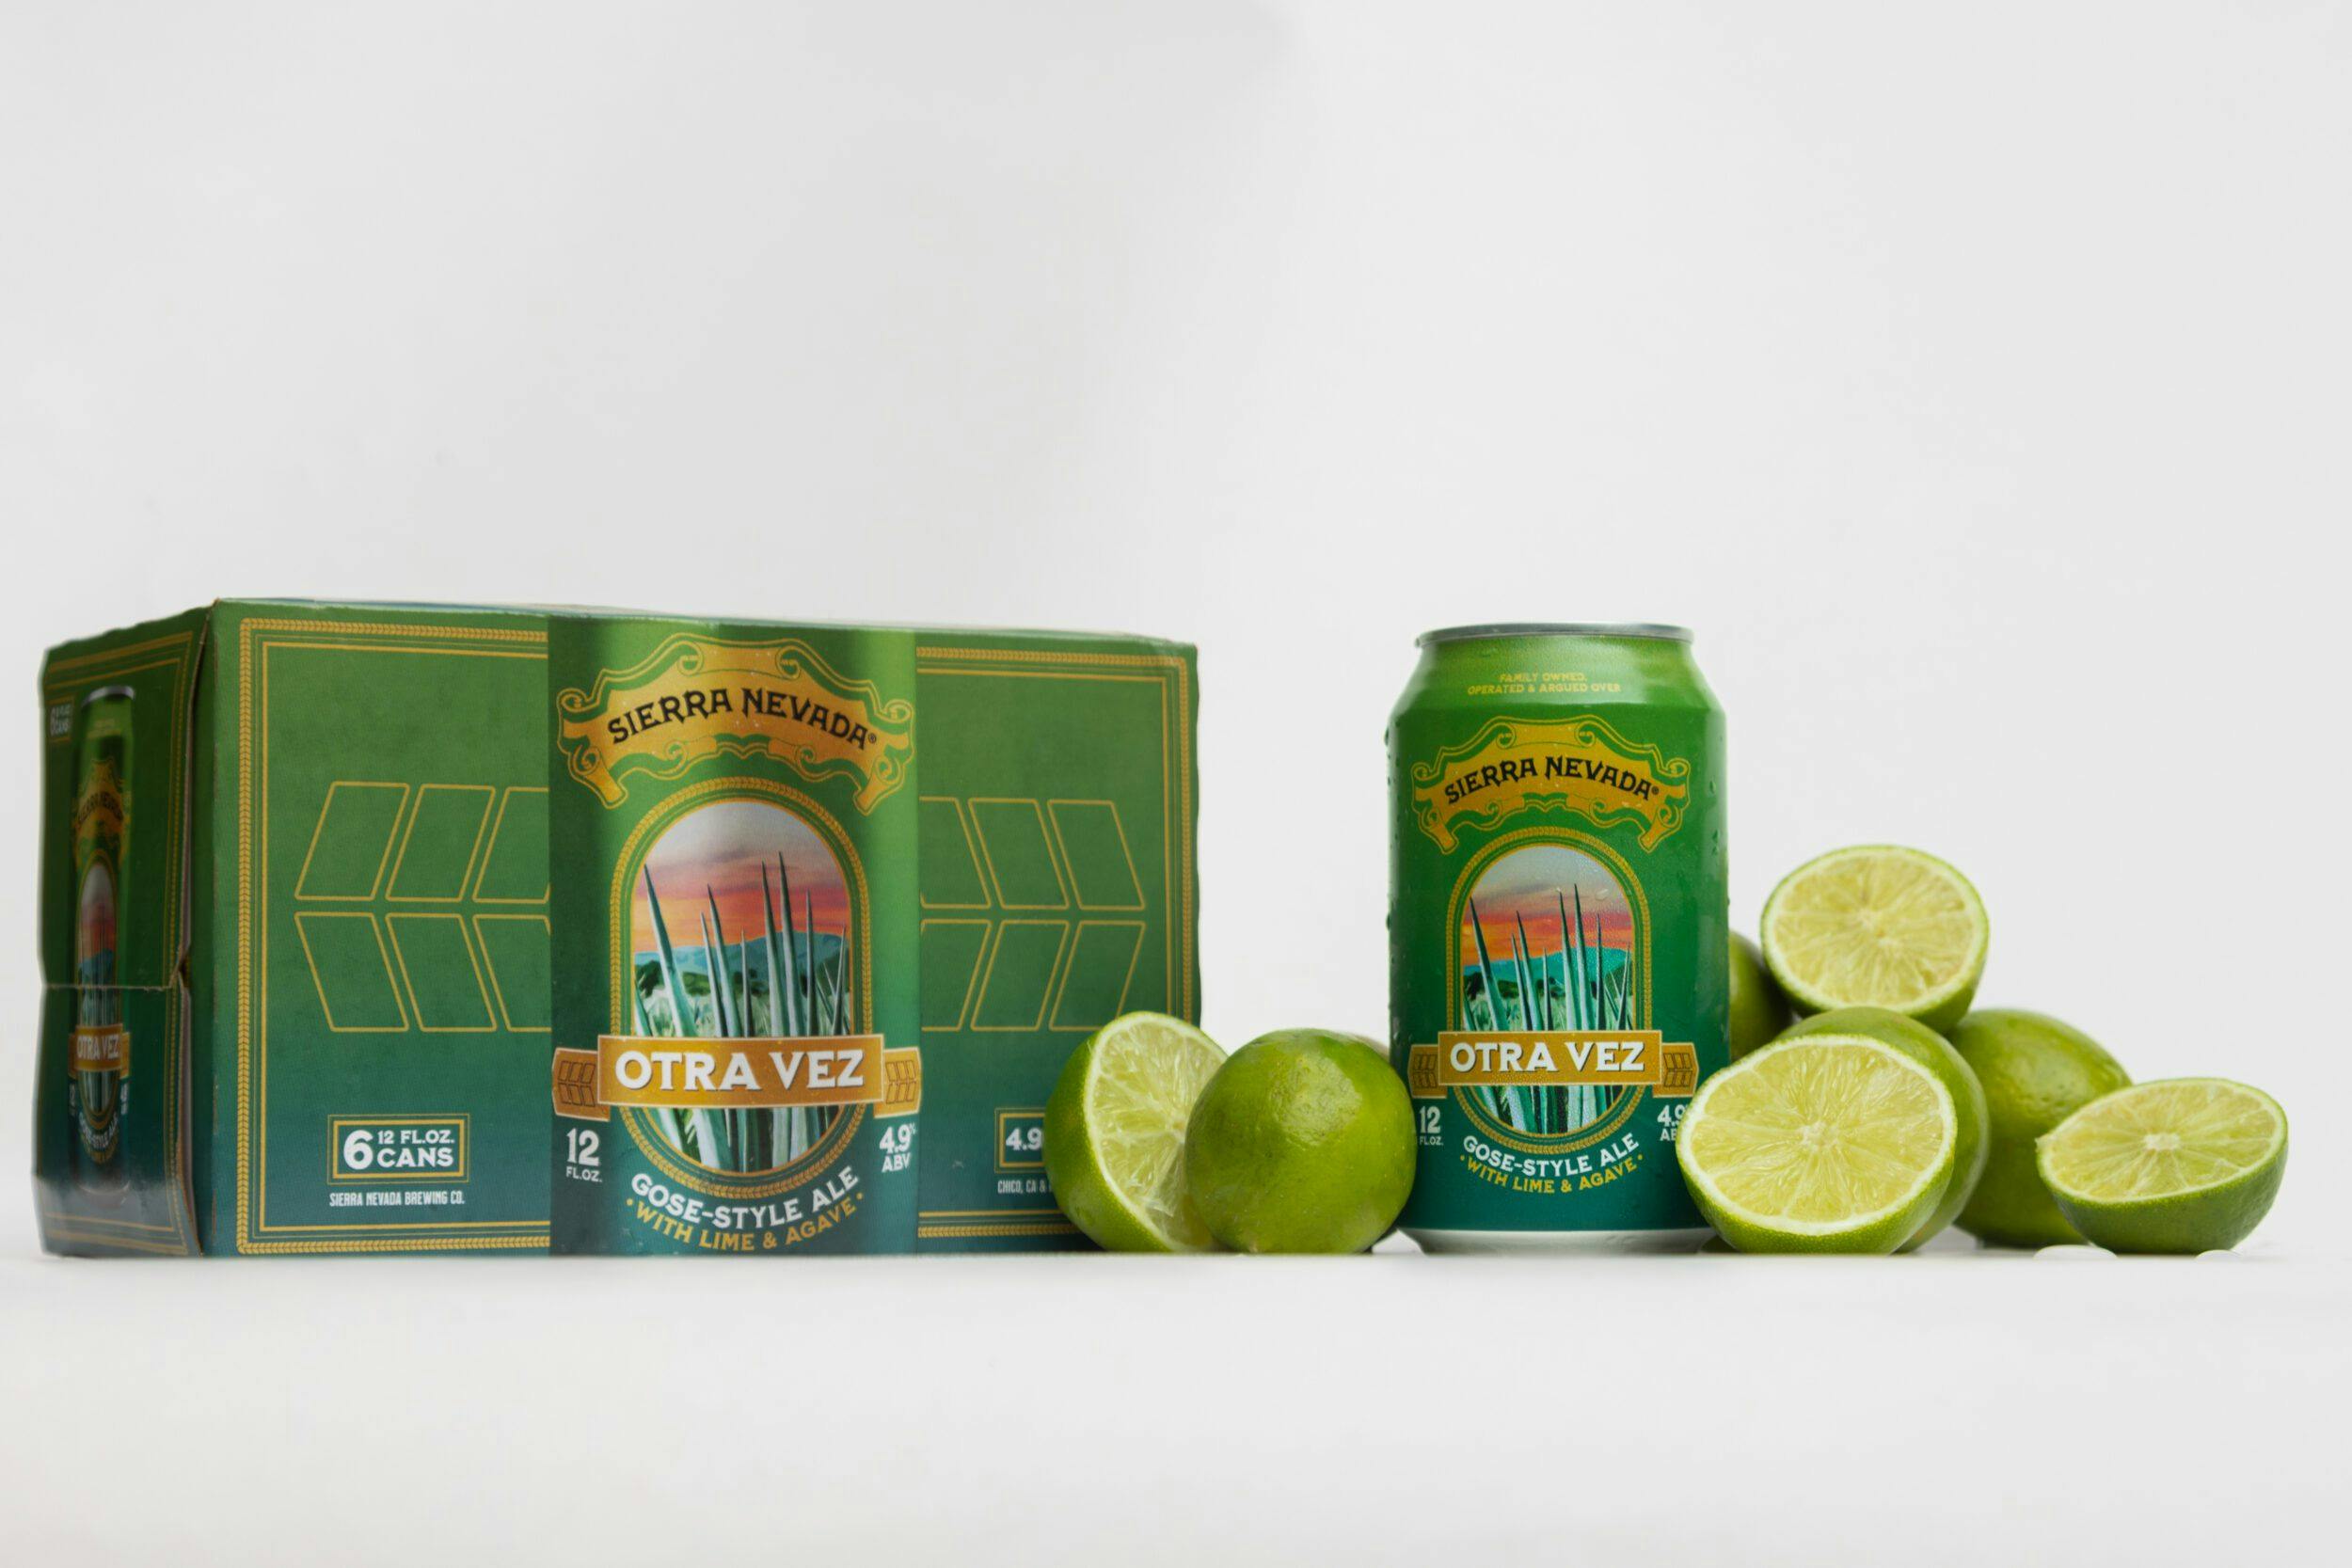 Otra Vez can and 6-pack with limes and agave